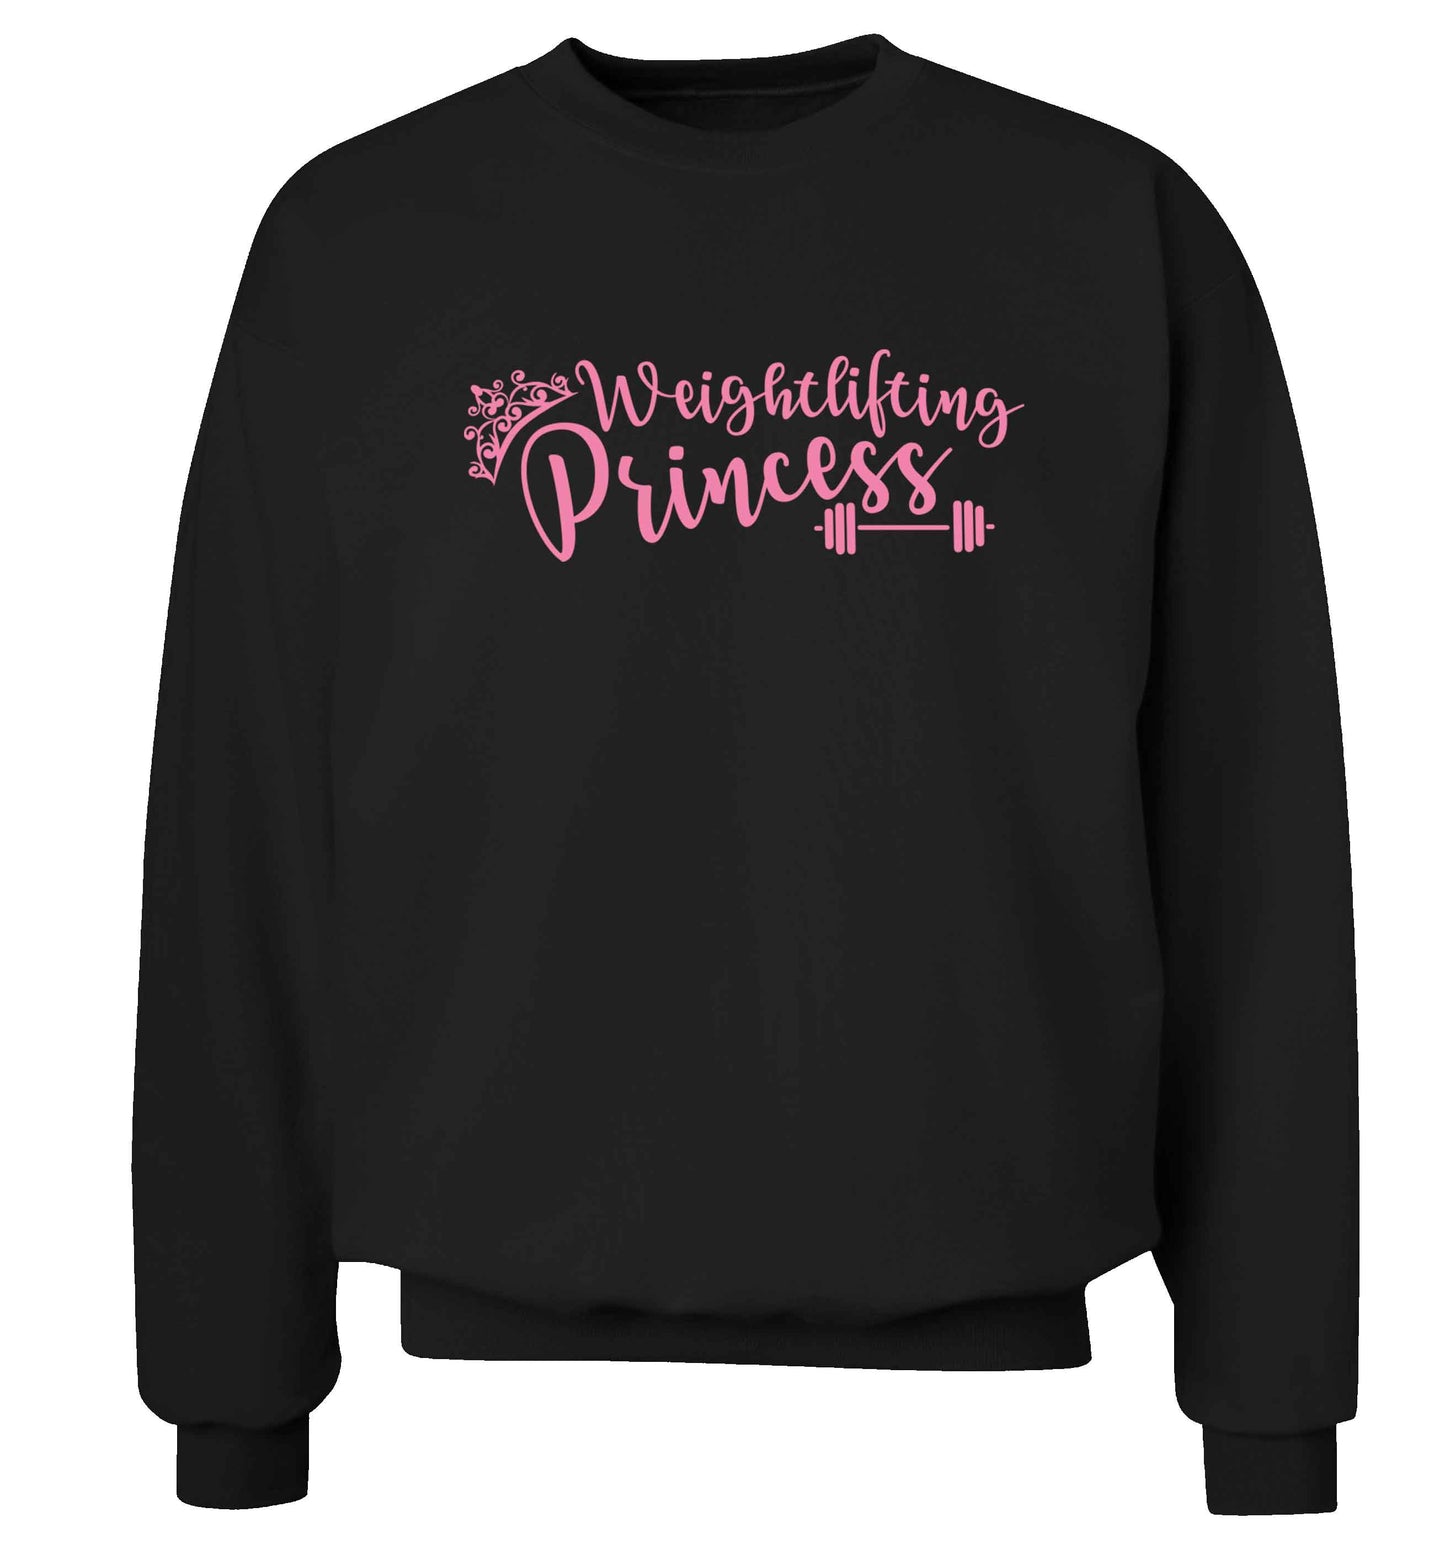 Weightlifting princess Adult's unisex black Sweater 2XL